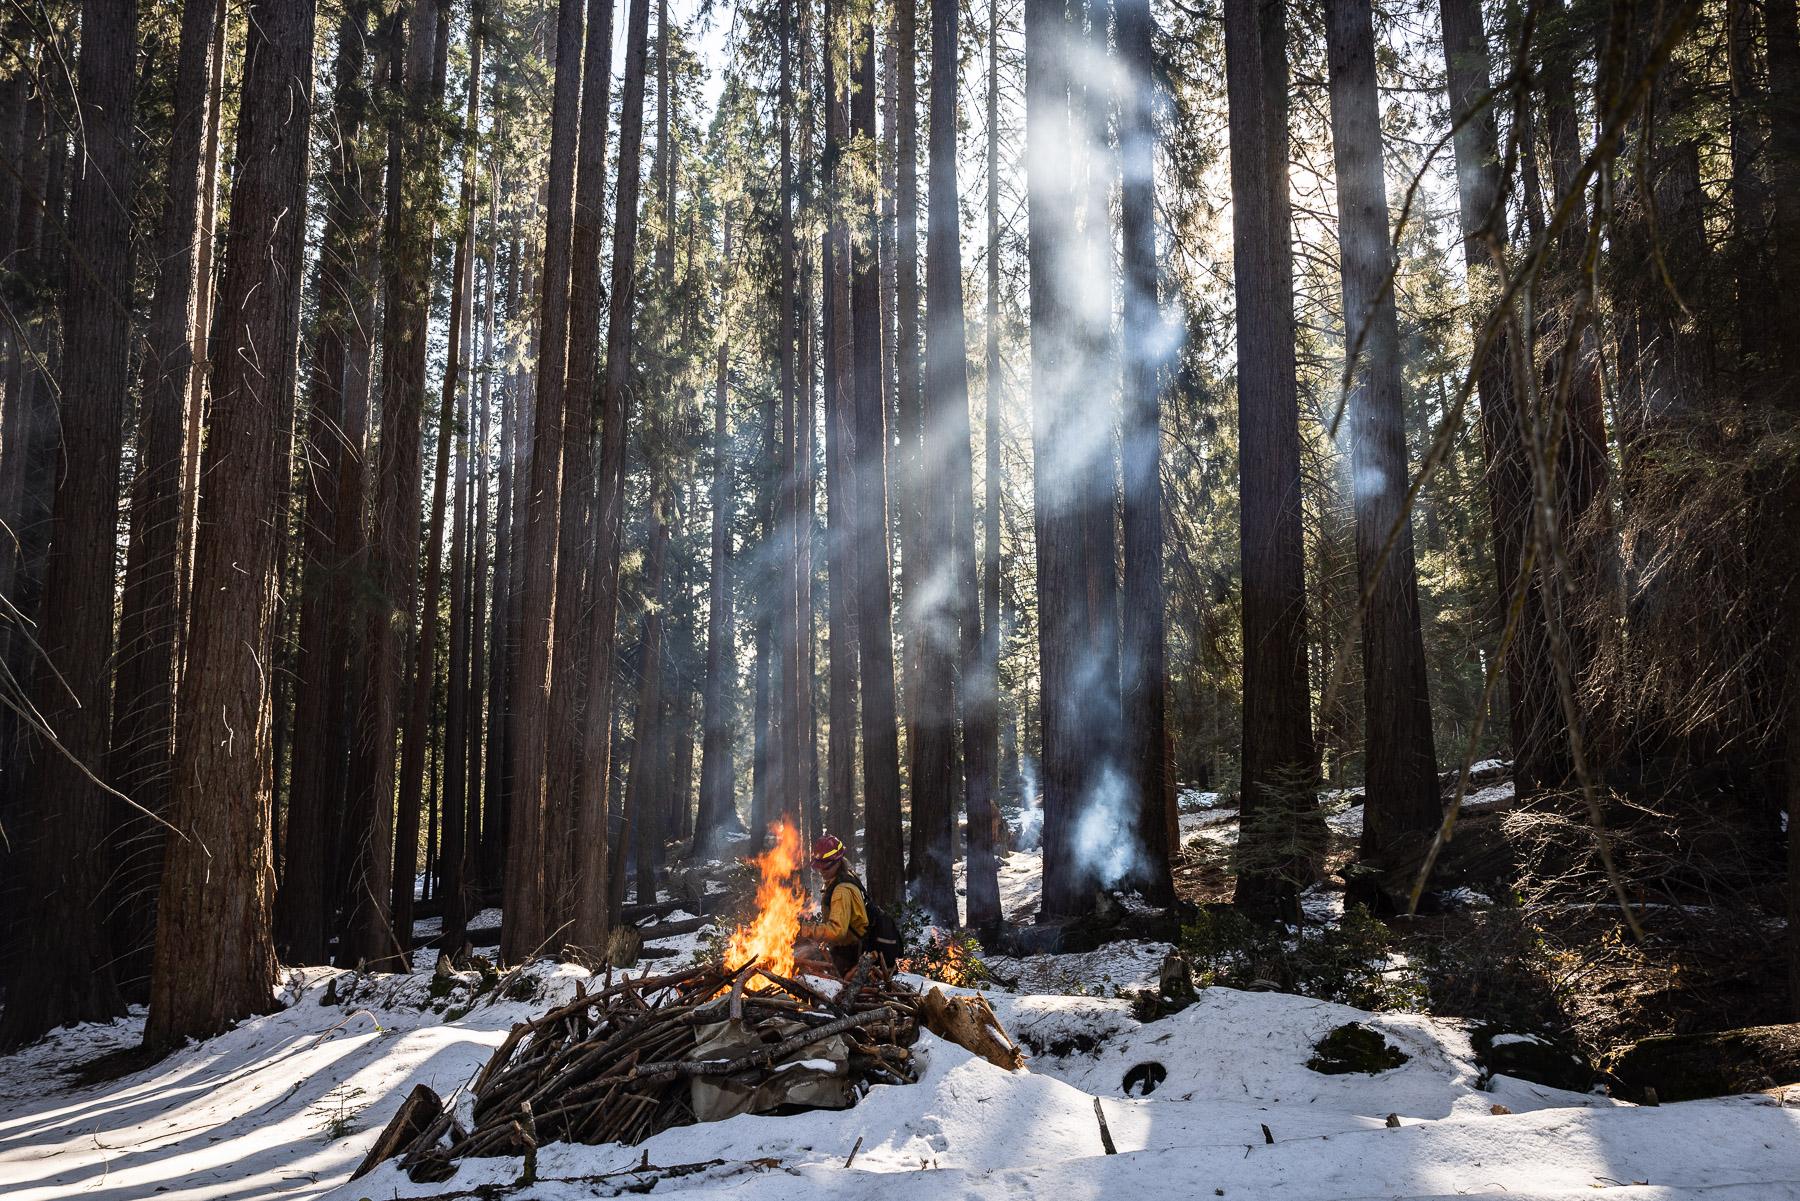 - Sequoia, a year in a burning forest - Fire crews in Big Stump Grove rake fallen tree branches...